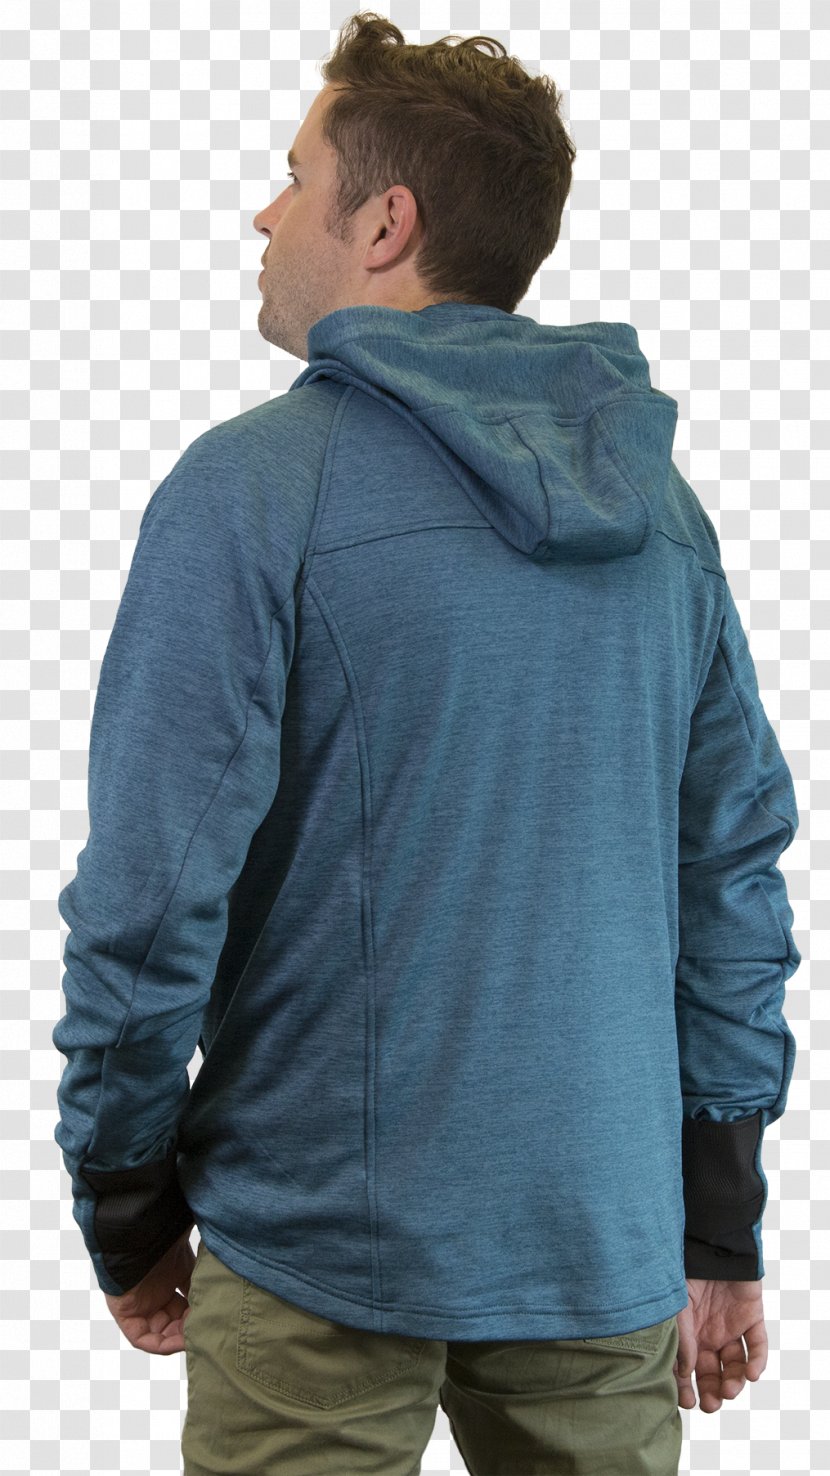 Hoodie Jacket Outerwear Clothing Blue Transparent PNG